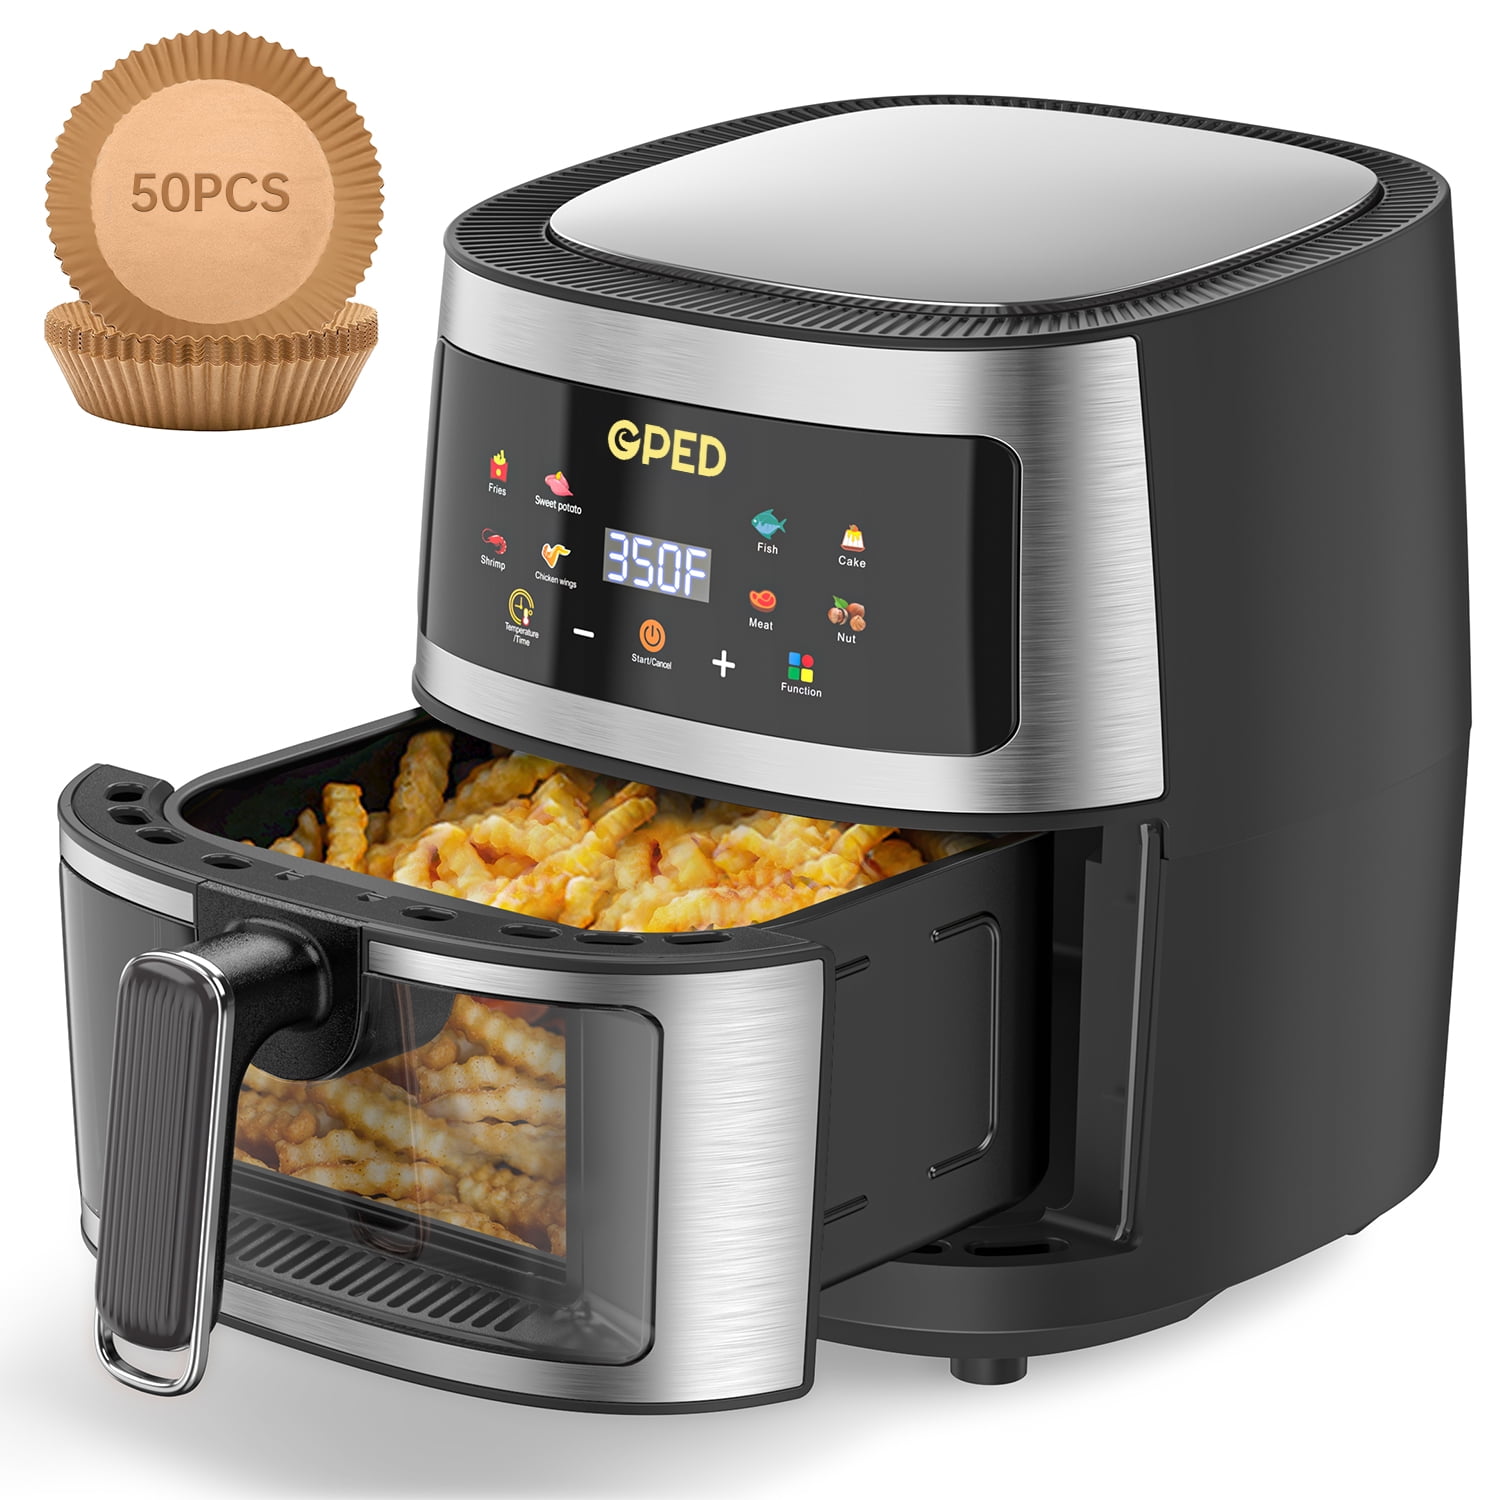 DEIME Air Fryer 8.5 QT Oilless Oven Large AirFryer Healthy Cooker with 10  1-Touch Preset, Visible Cooking Window, Non-Stick Basket & Dishwasher Safe